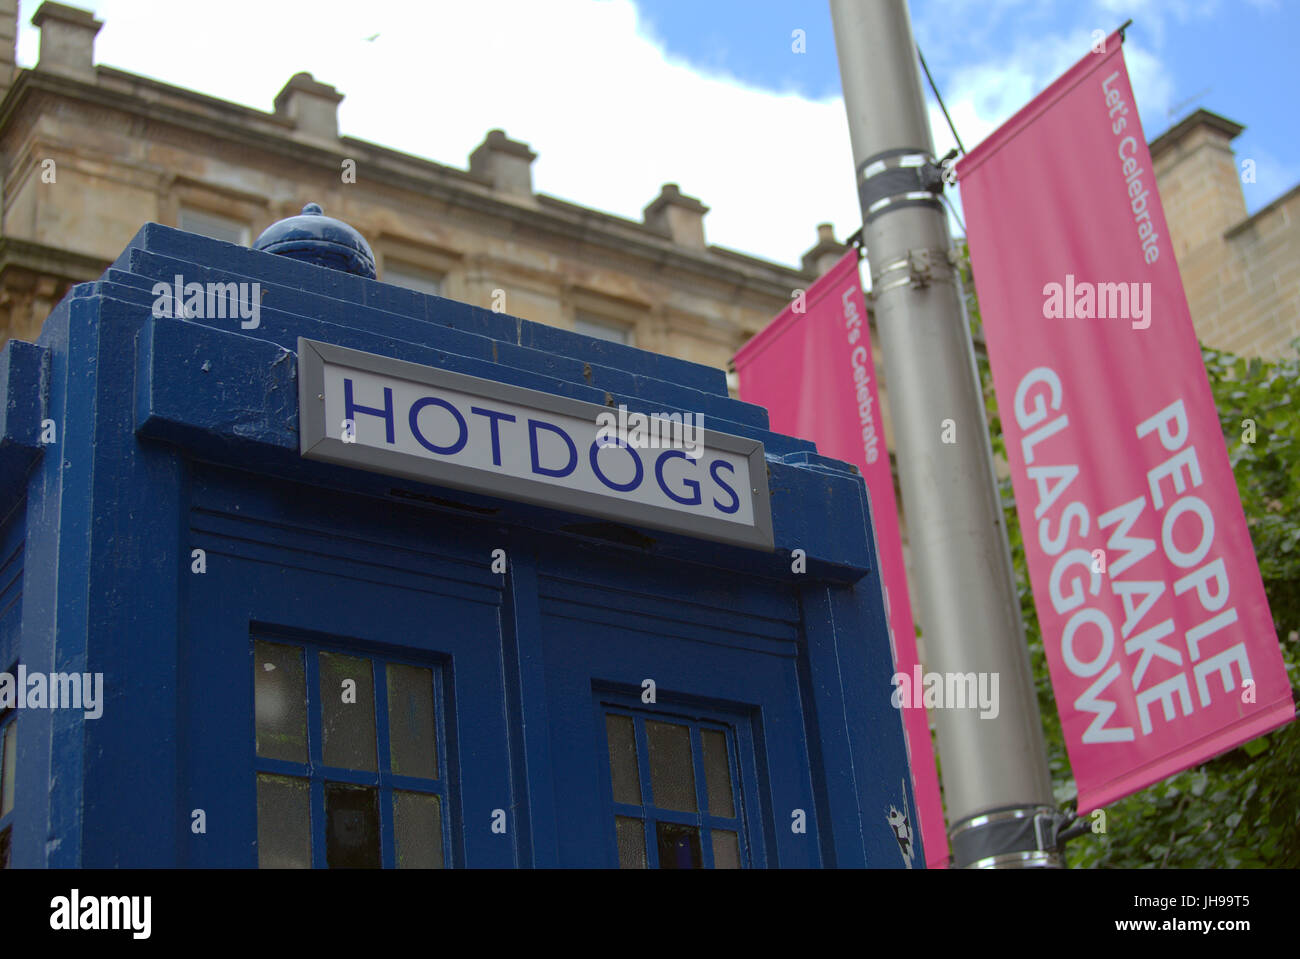 people make Glasgow banners beside blue police box tardis converted to hot dog stand  Buchanan street Stock Photo